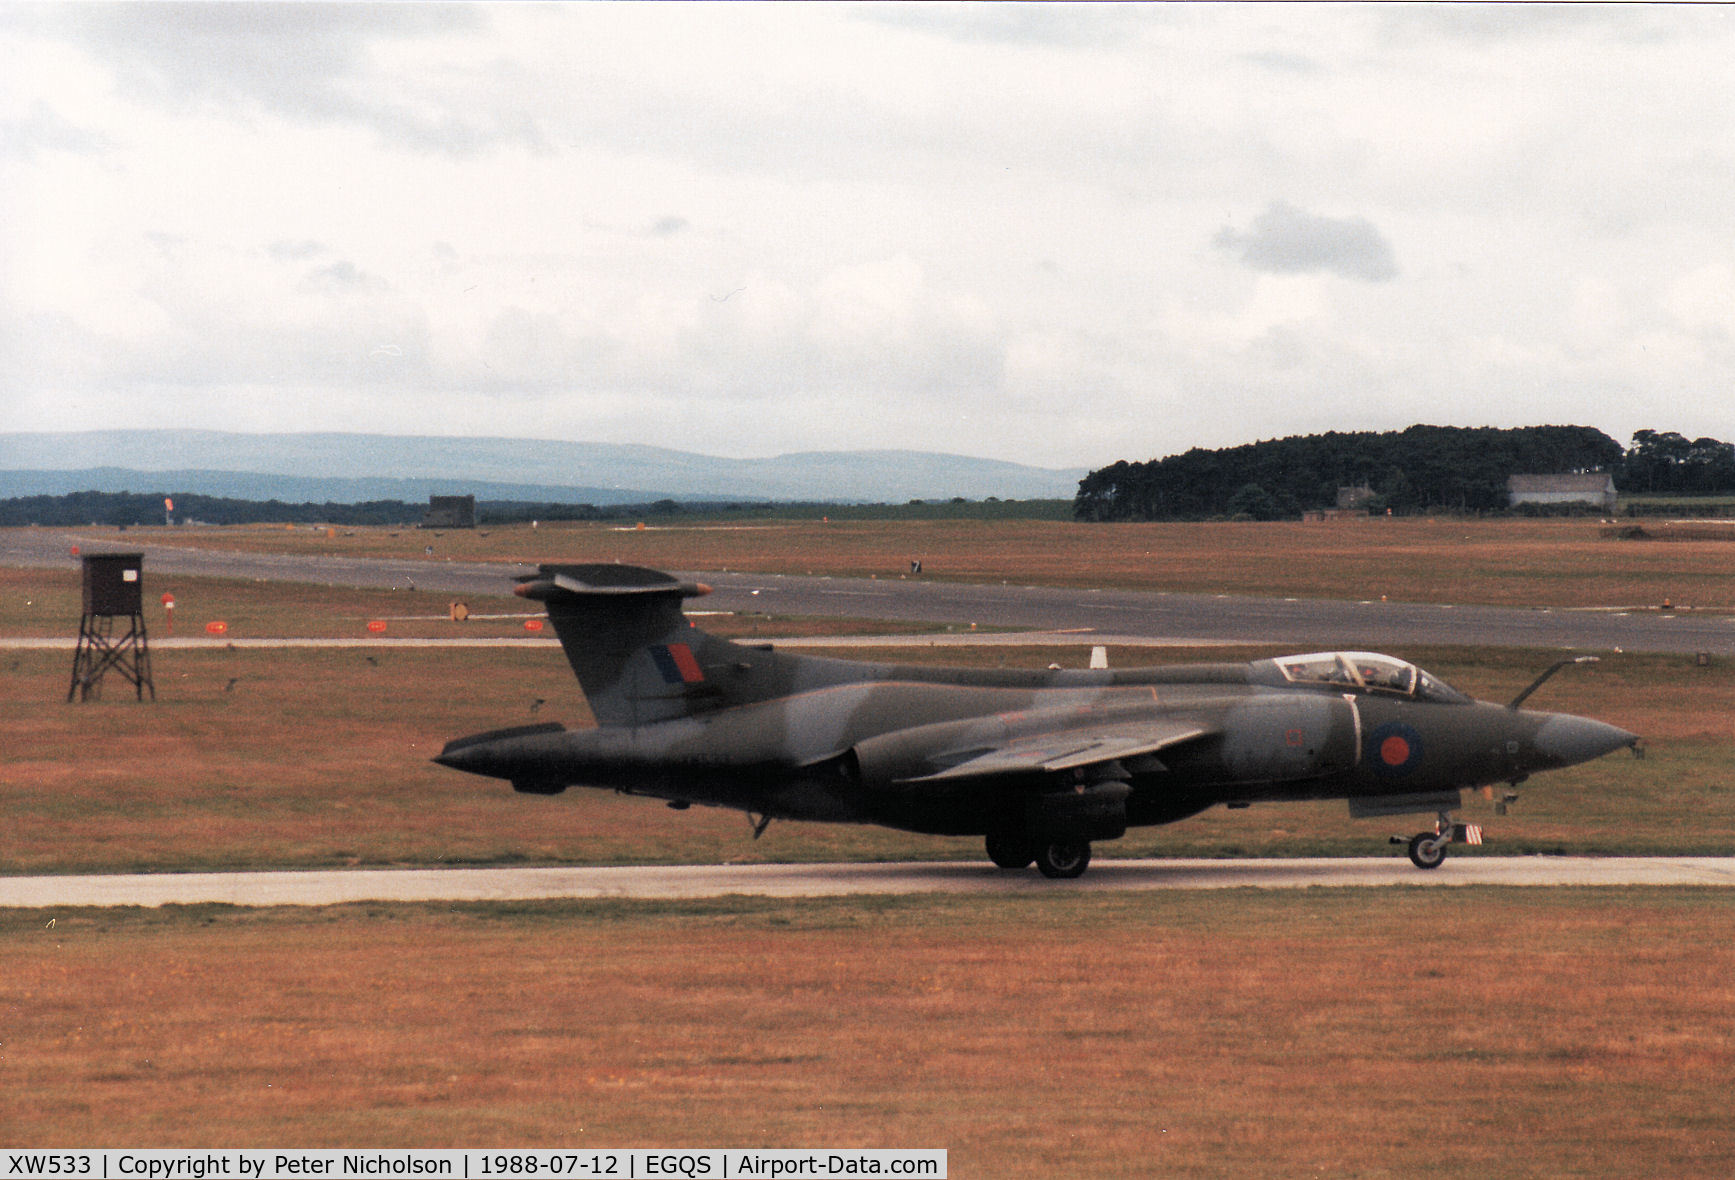 XW533, 1971 Hawker Siddeley Buccaneer S.2B C/N B3-02-70, Buccaneer S.2B of 237 Operational Conversion Unit awaiting clearance to join the active runway at RAF Lossiemouth in the Summer of 1988.